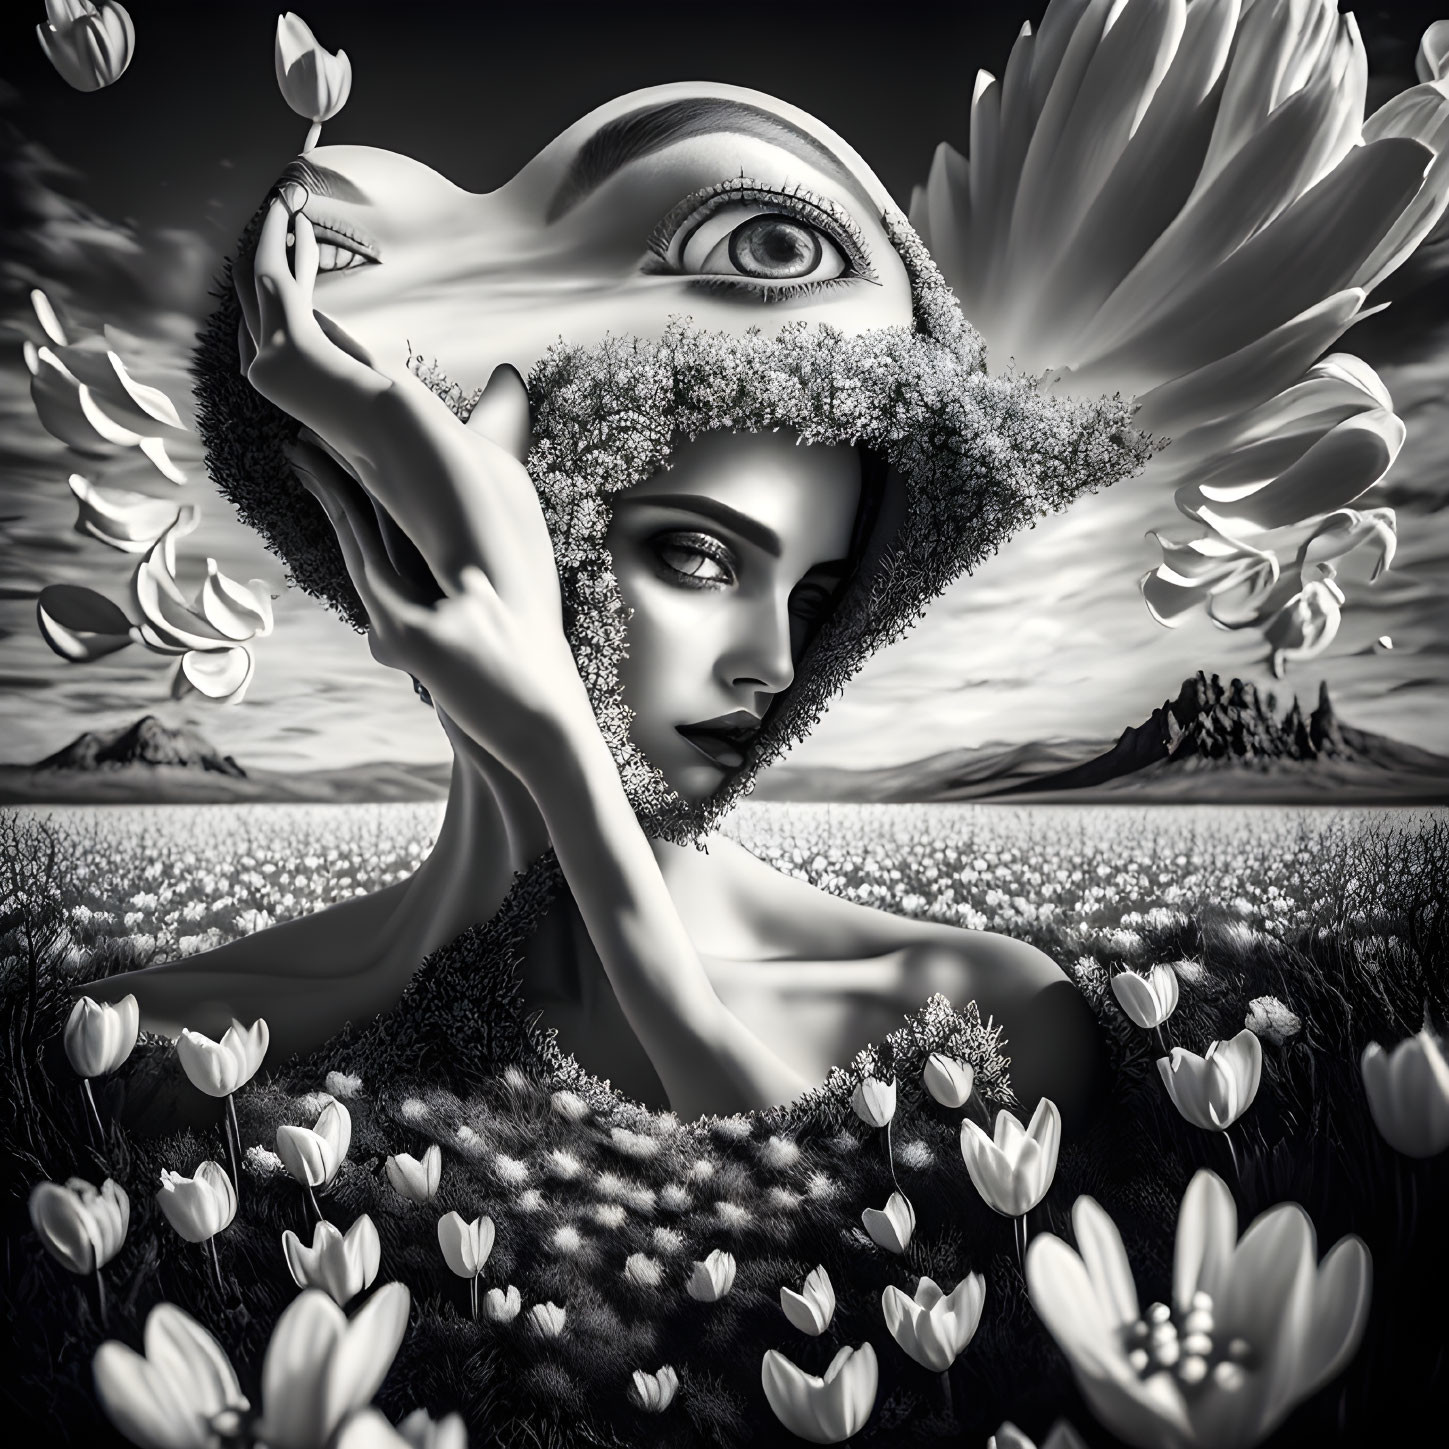 Monochrome surreal image of woman with landscape face in flower field